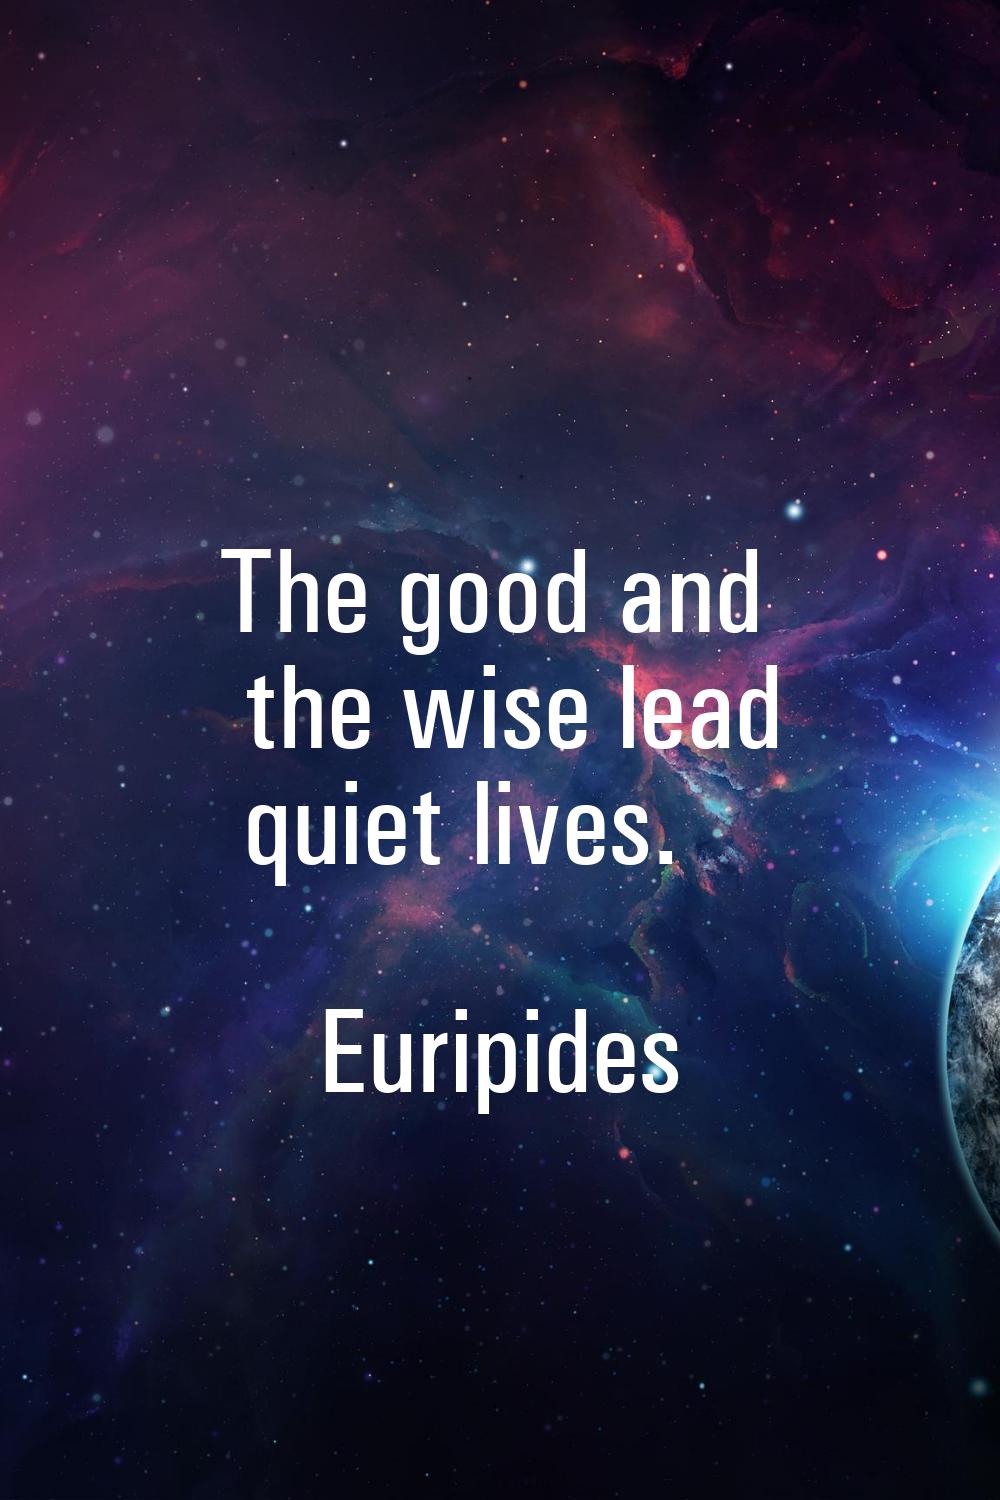 The good and the wise lead quiet lives.